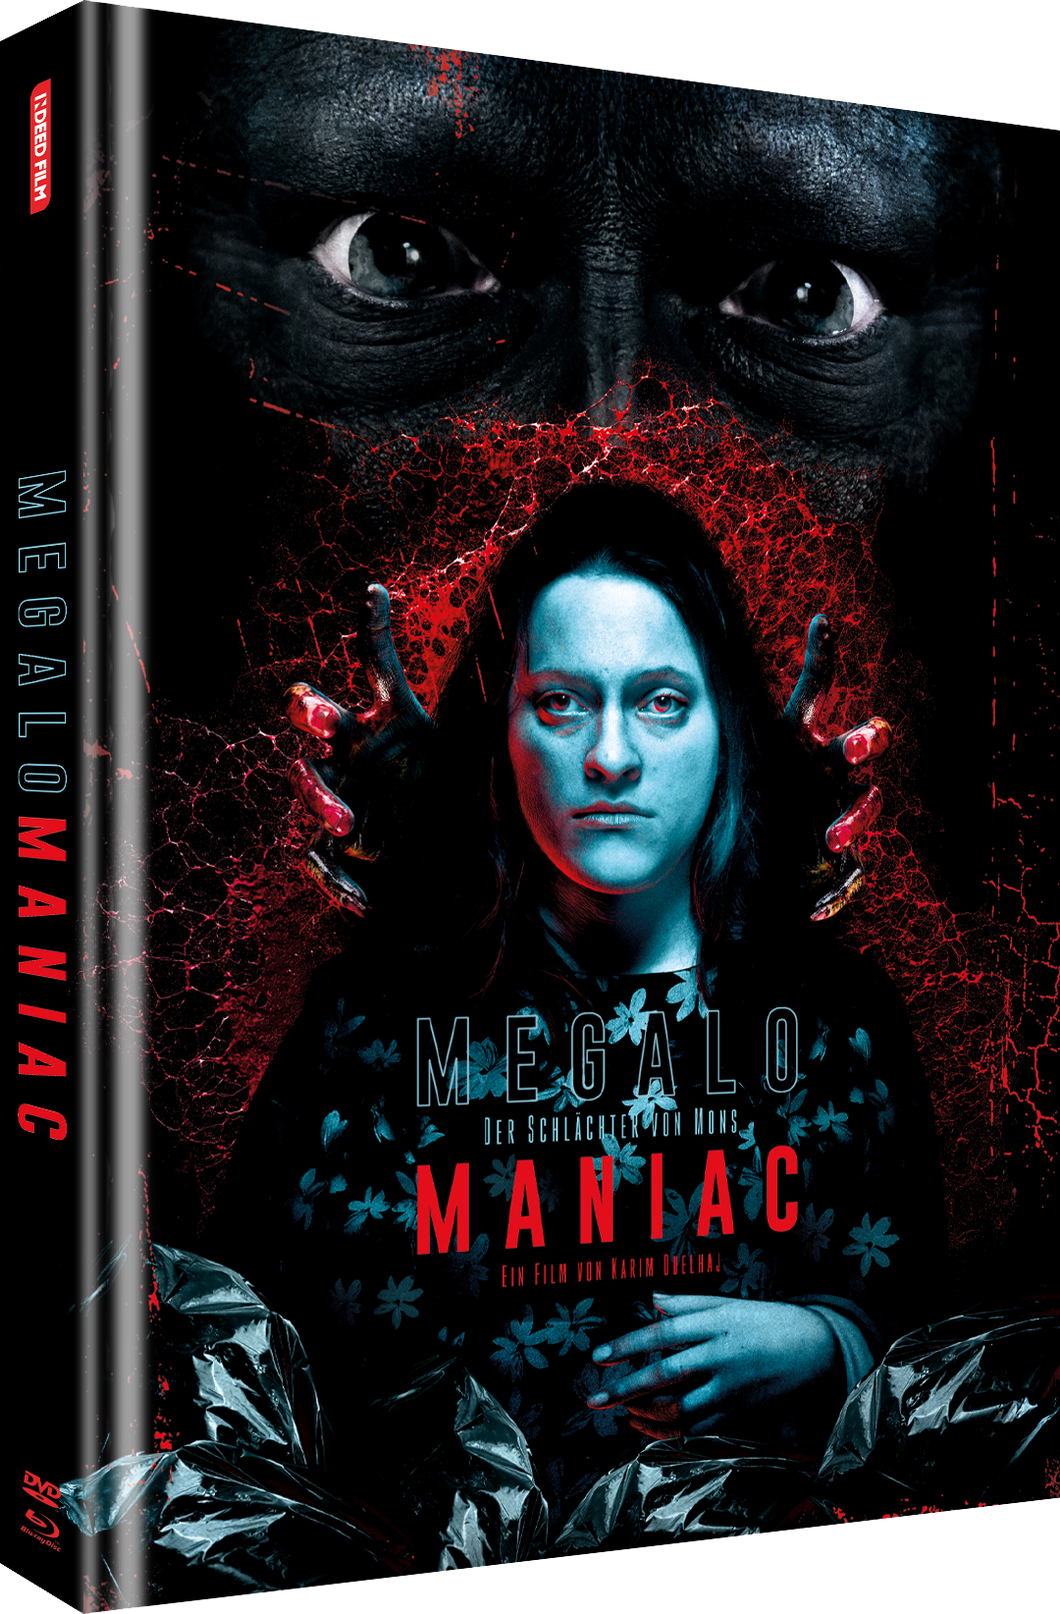 MEGALOMANIAC 2-Disc Limited UNCUT Collector’s Edition im MediaBook COVER A - NEARLY SOLD OUT!!!